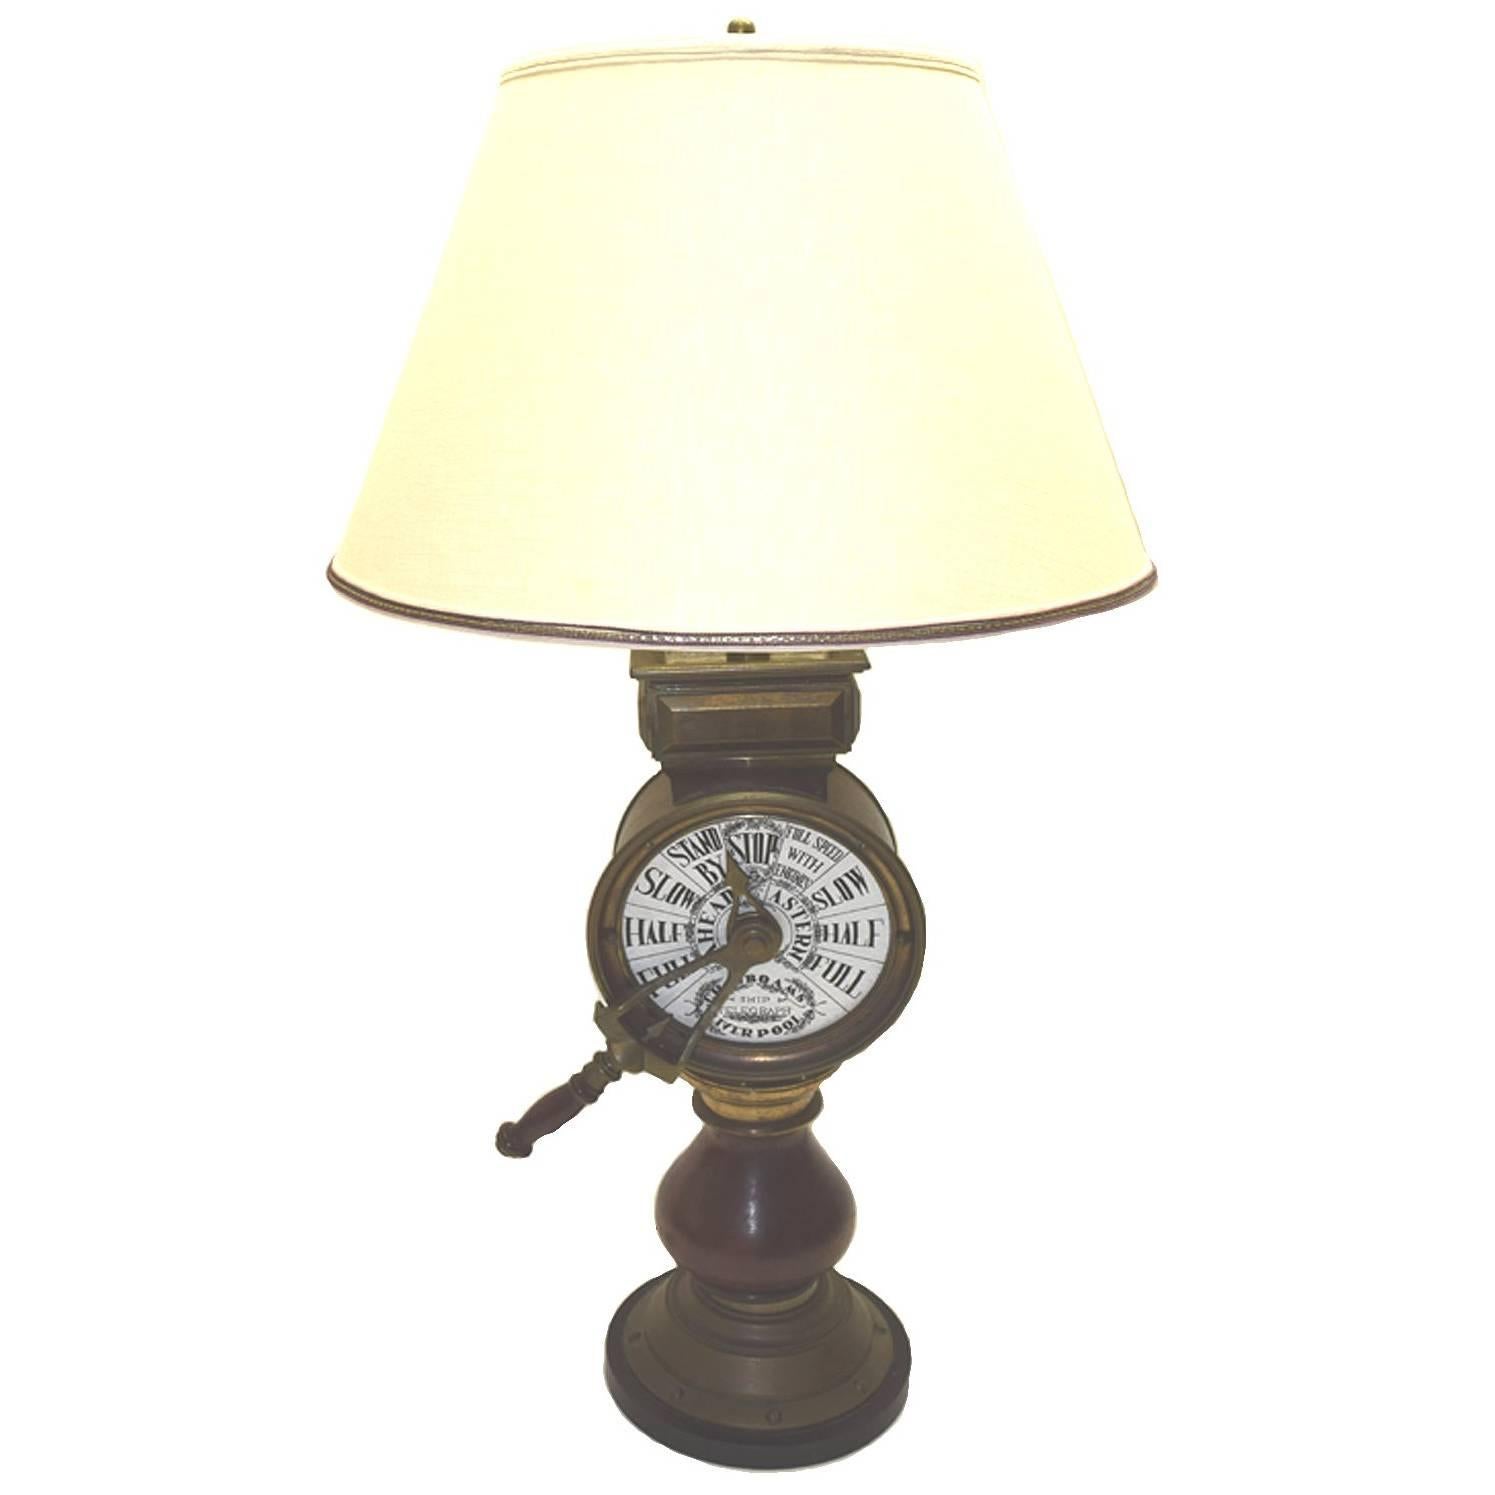 Antique English Mahogany and Brass Ship's Telegraph Table Lamp, circa 1860 For Sale